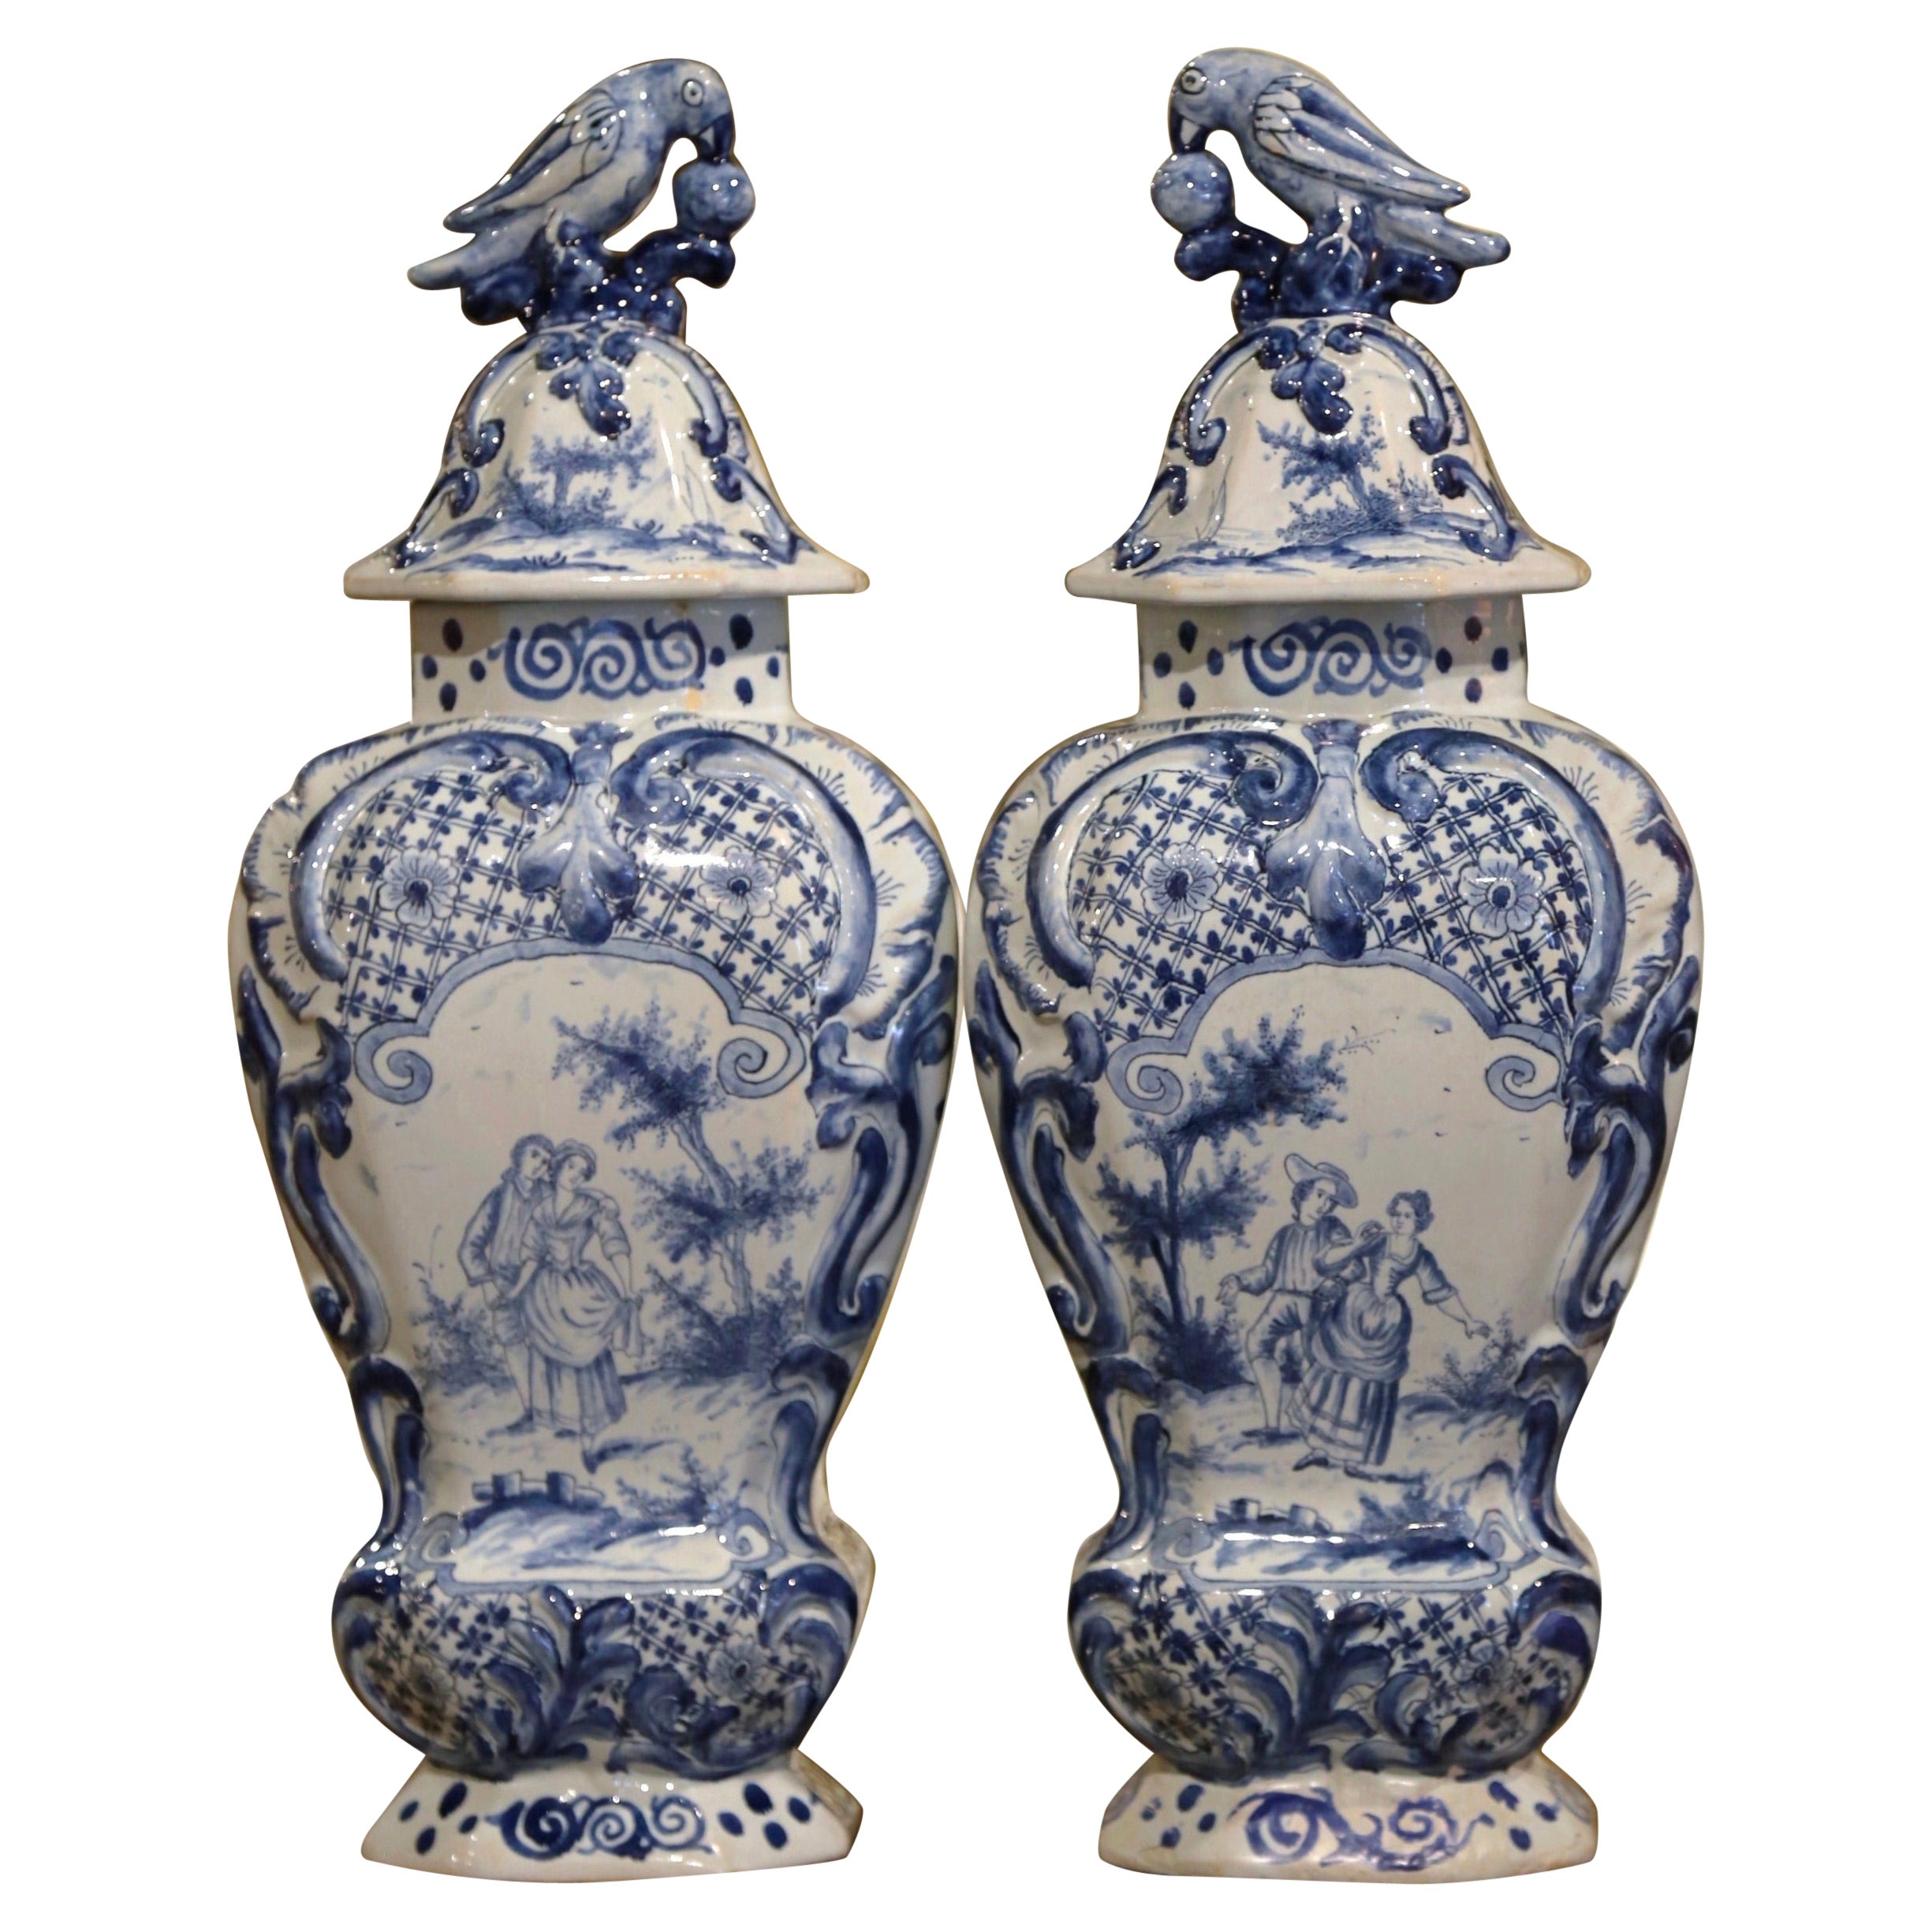 Pair of 19th Century French Blue and White Faience Delft Vases with Parrot Lids